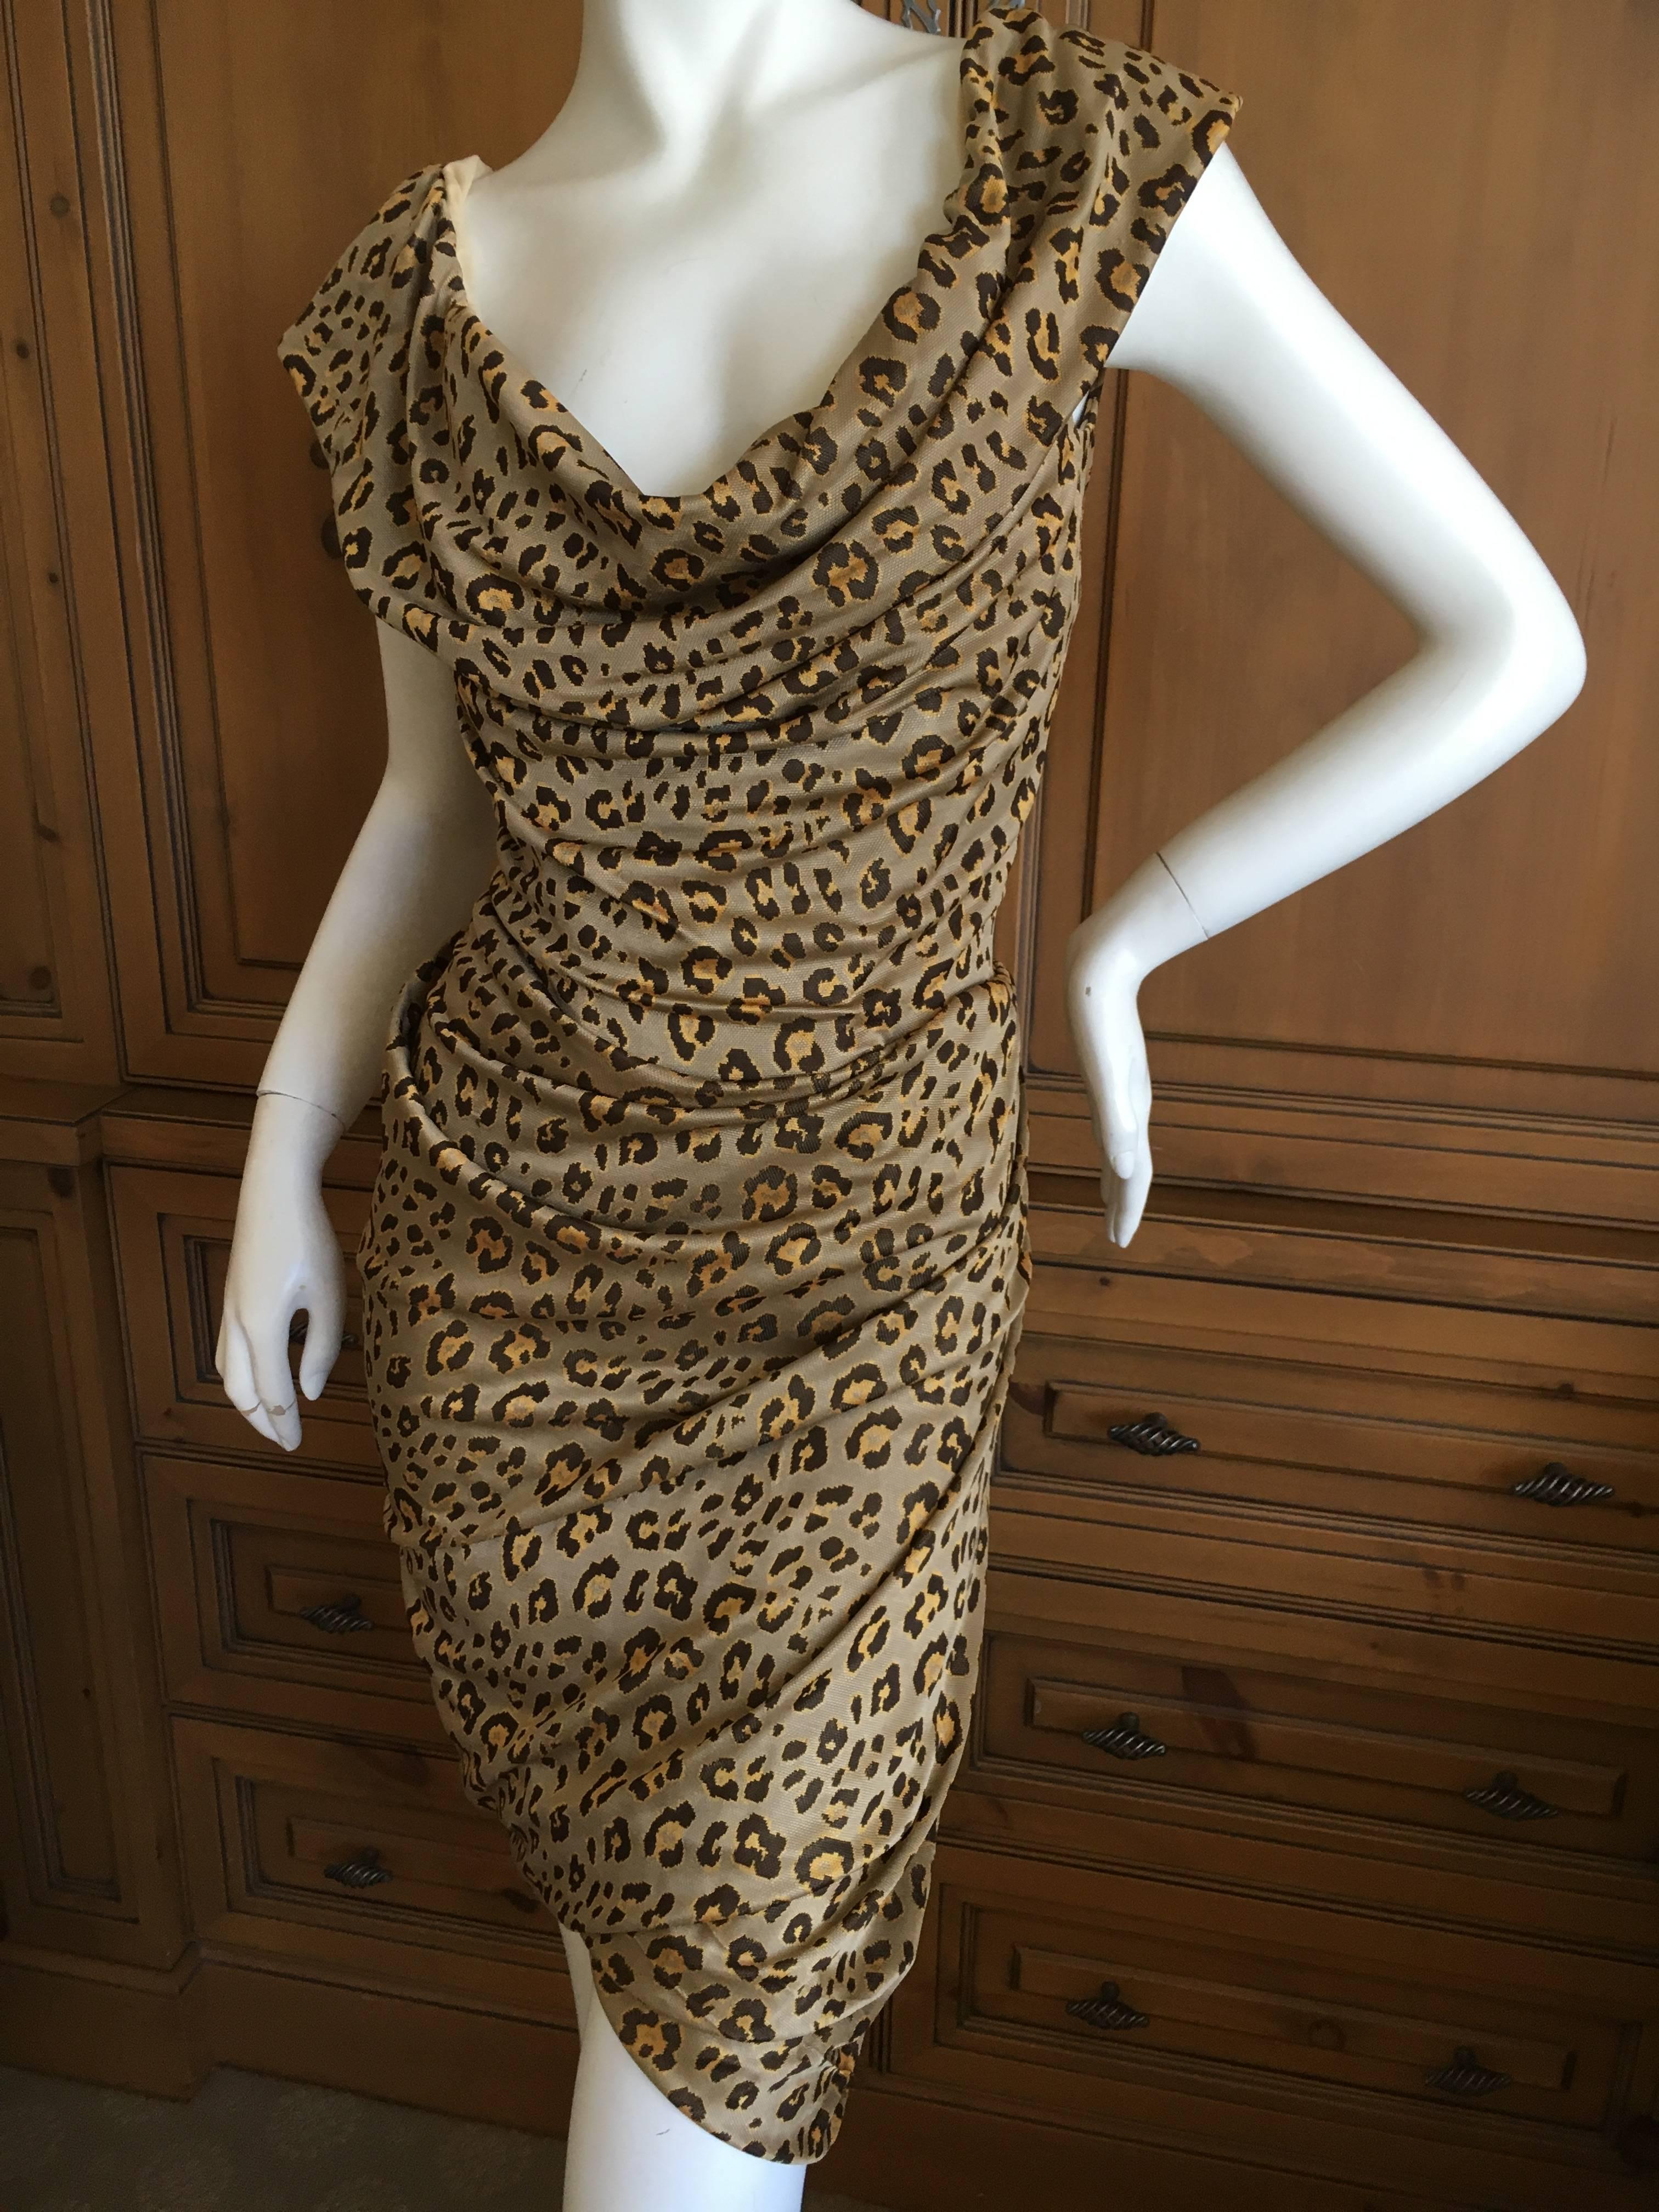 Super sexy draped leopard print dress from Vivienne Westwood Red Label.
There is a full inner corset, see photo's .
There is a lot of stretch in this fabric.
Size M
Bust 36